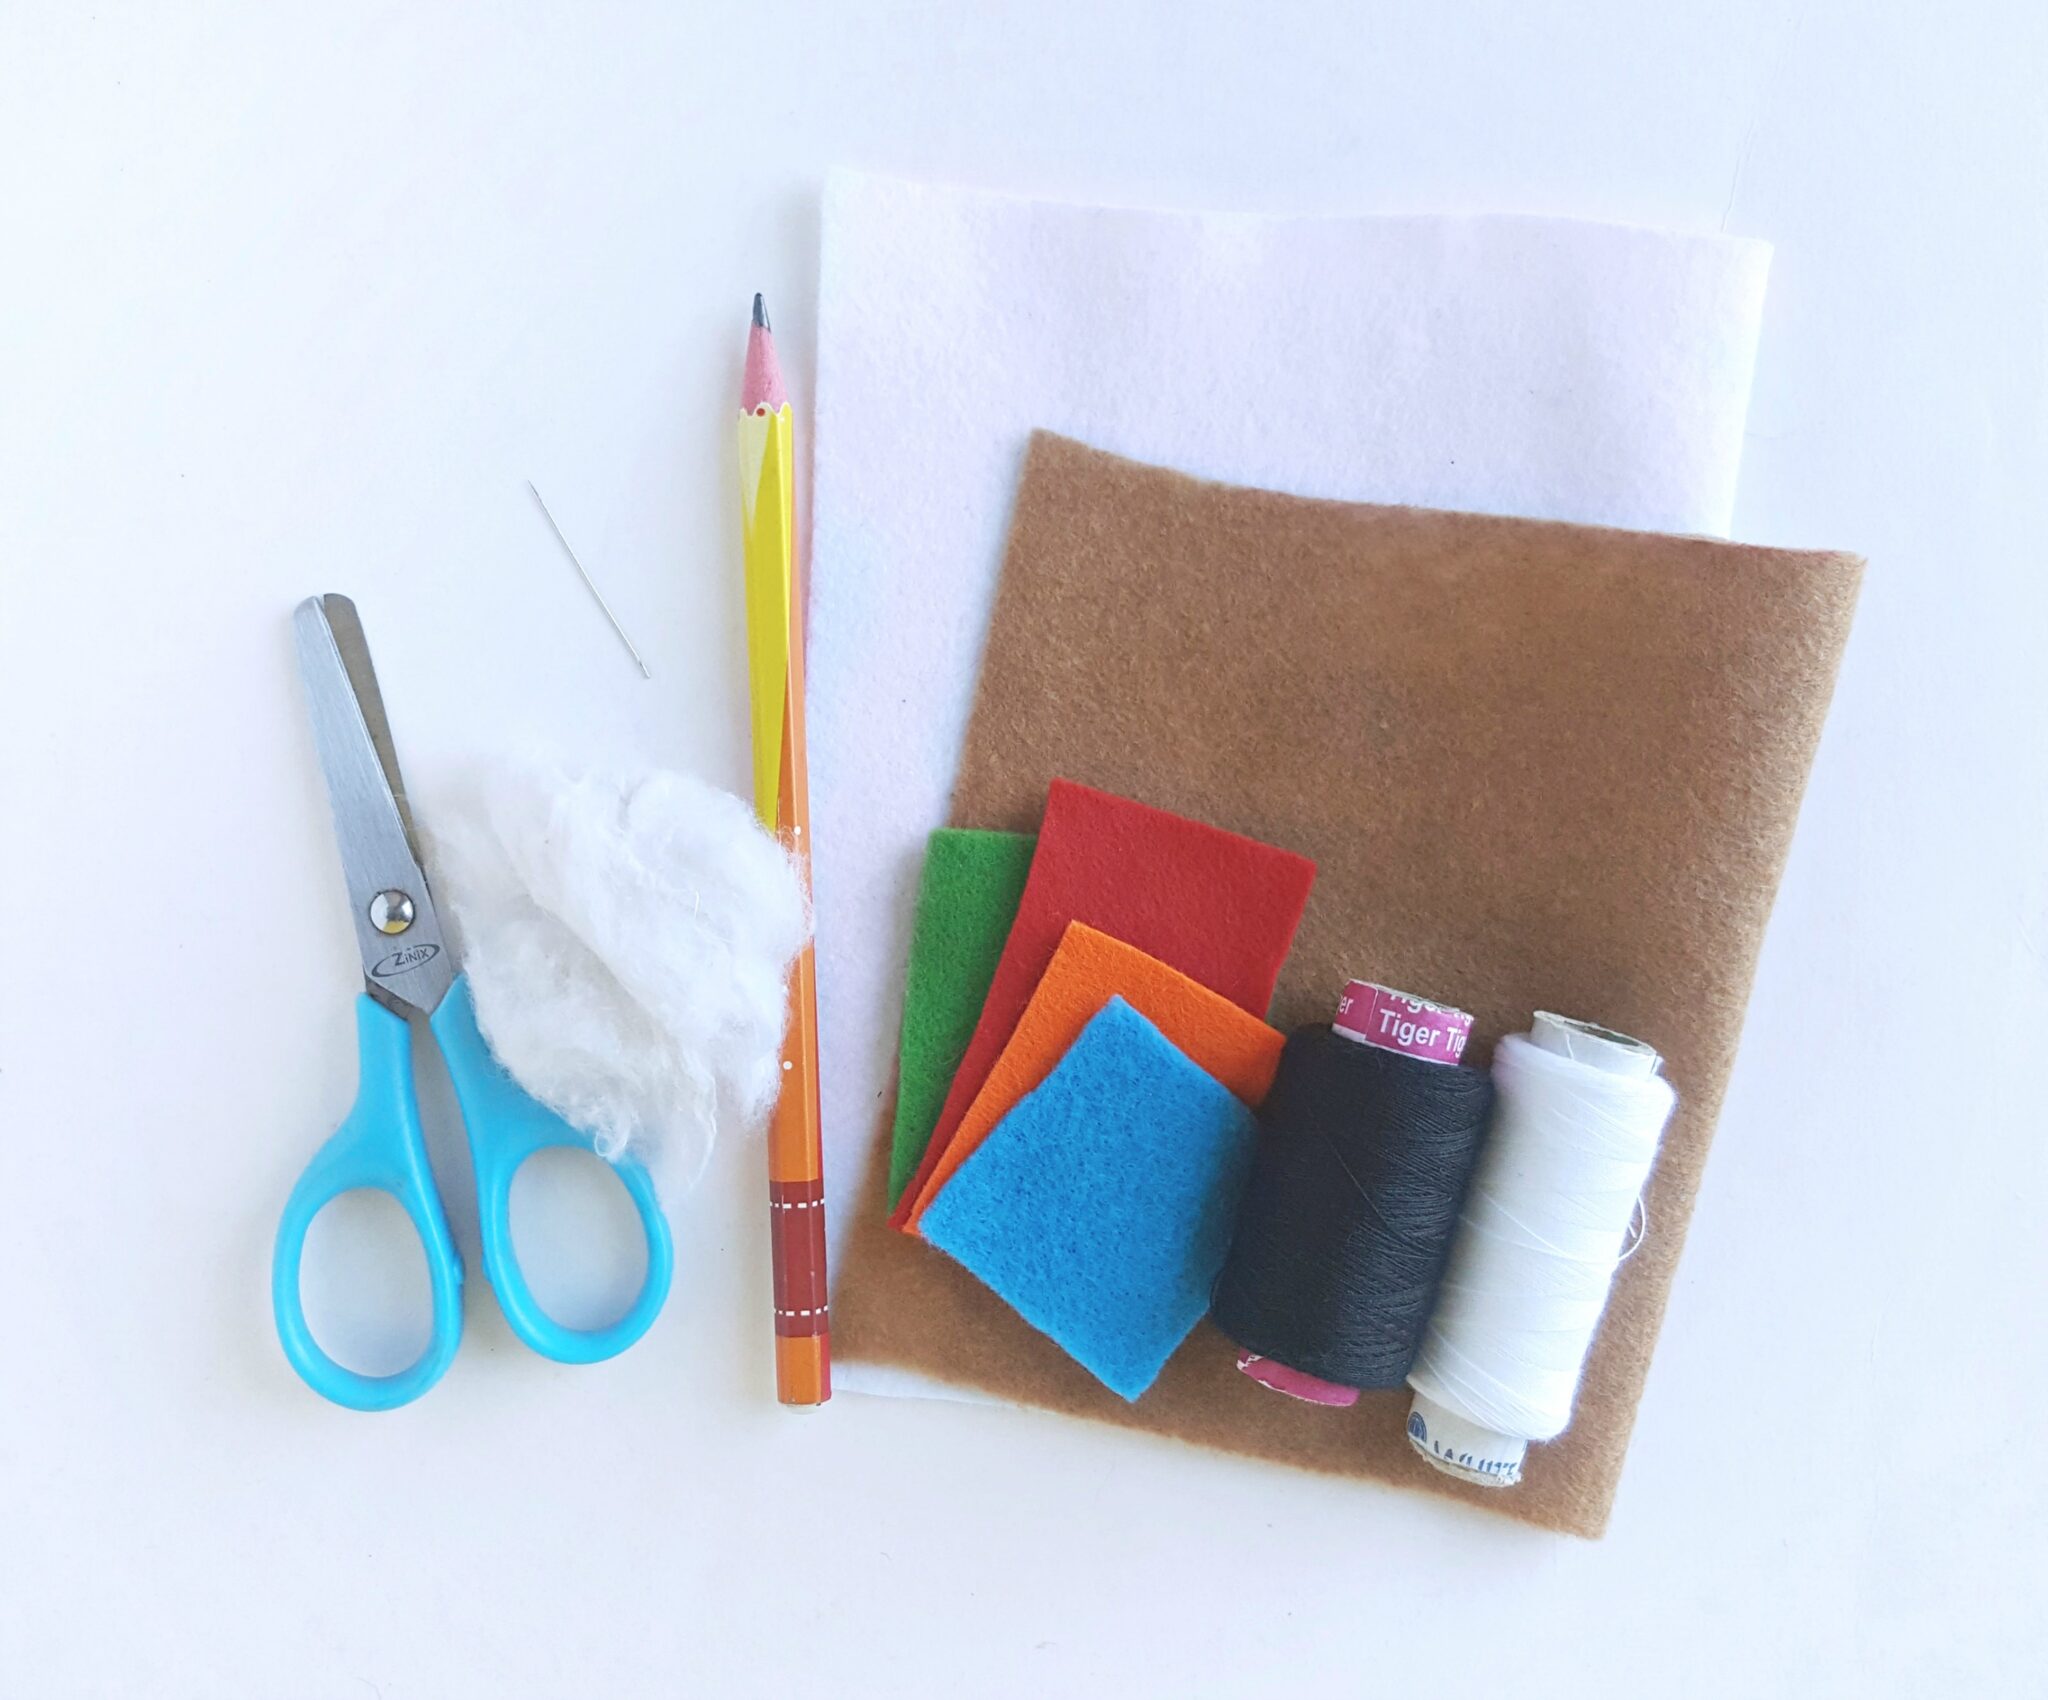 A collection of things needed to make the craft: scissors, cotton, felt, needle and thread, and pencil.